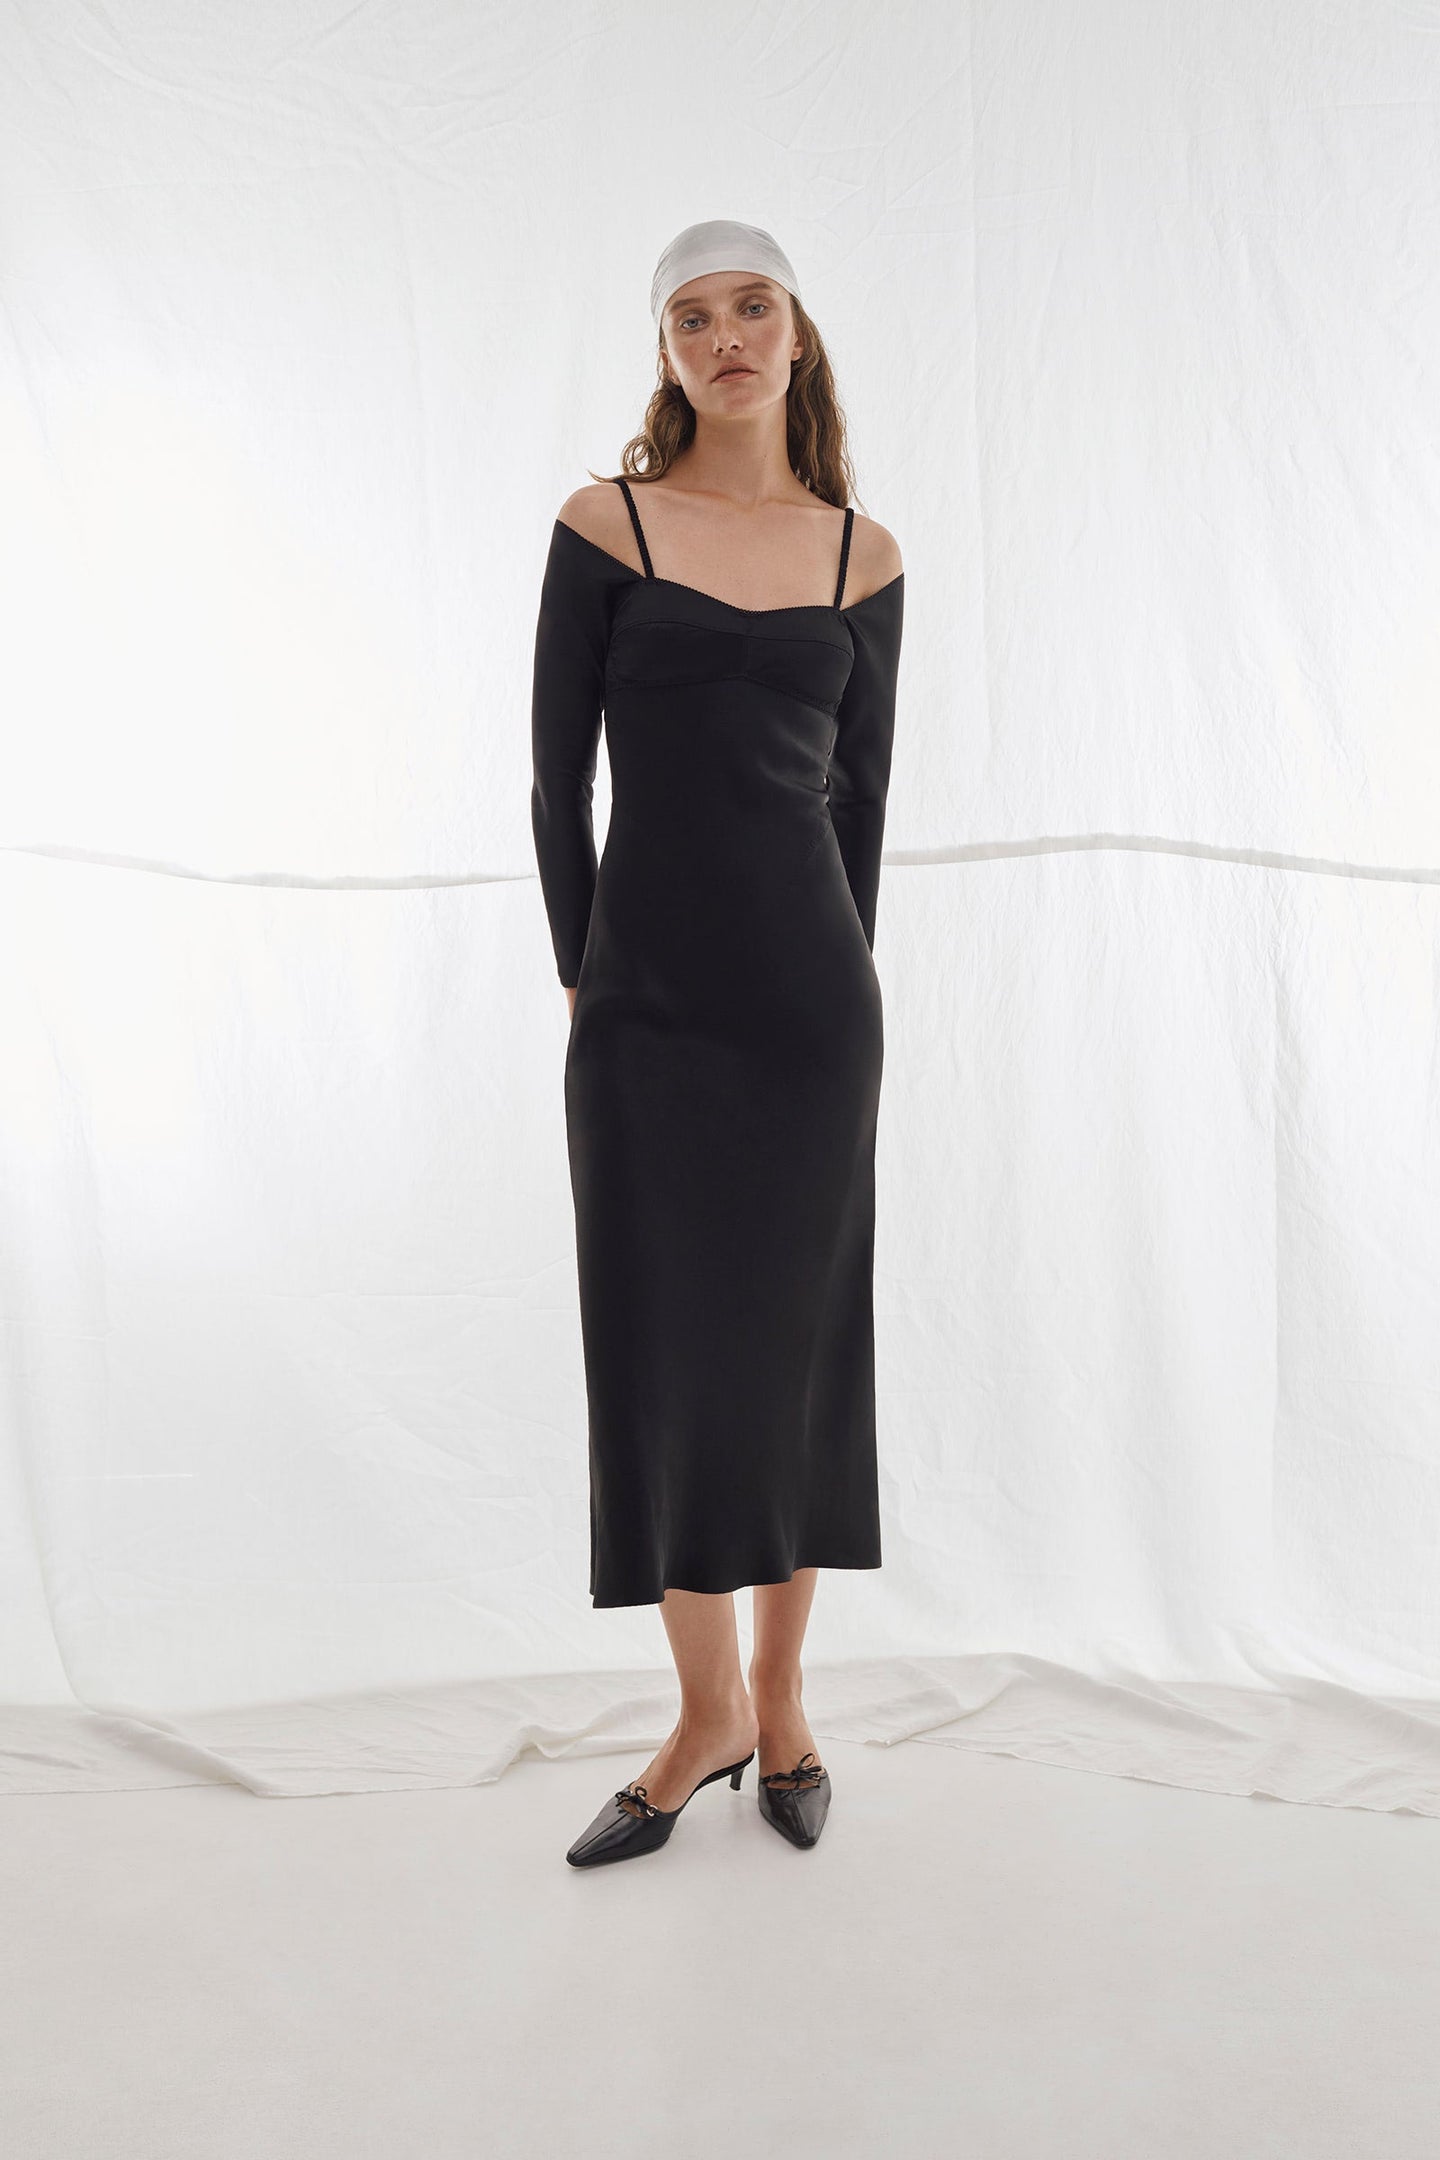 This Melancholy bustier dress is created to manifest woman’s sensuality and elegance. Spun from a soft-touch viscose it has a streamlined silhouette and closely hugs the body before falling to a gently flared hem.